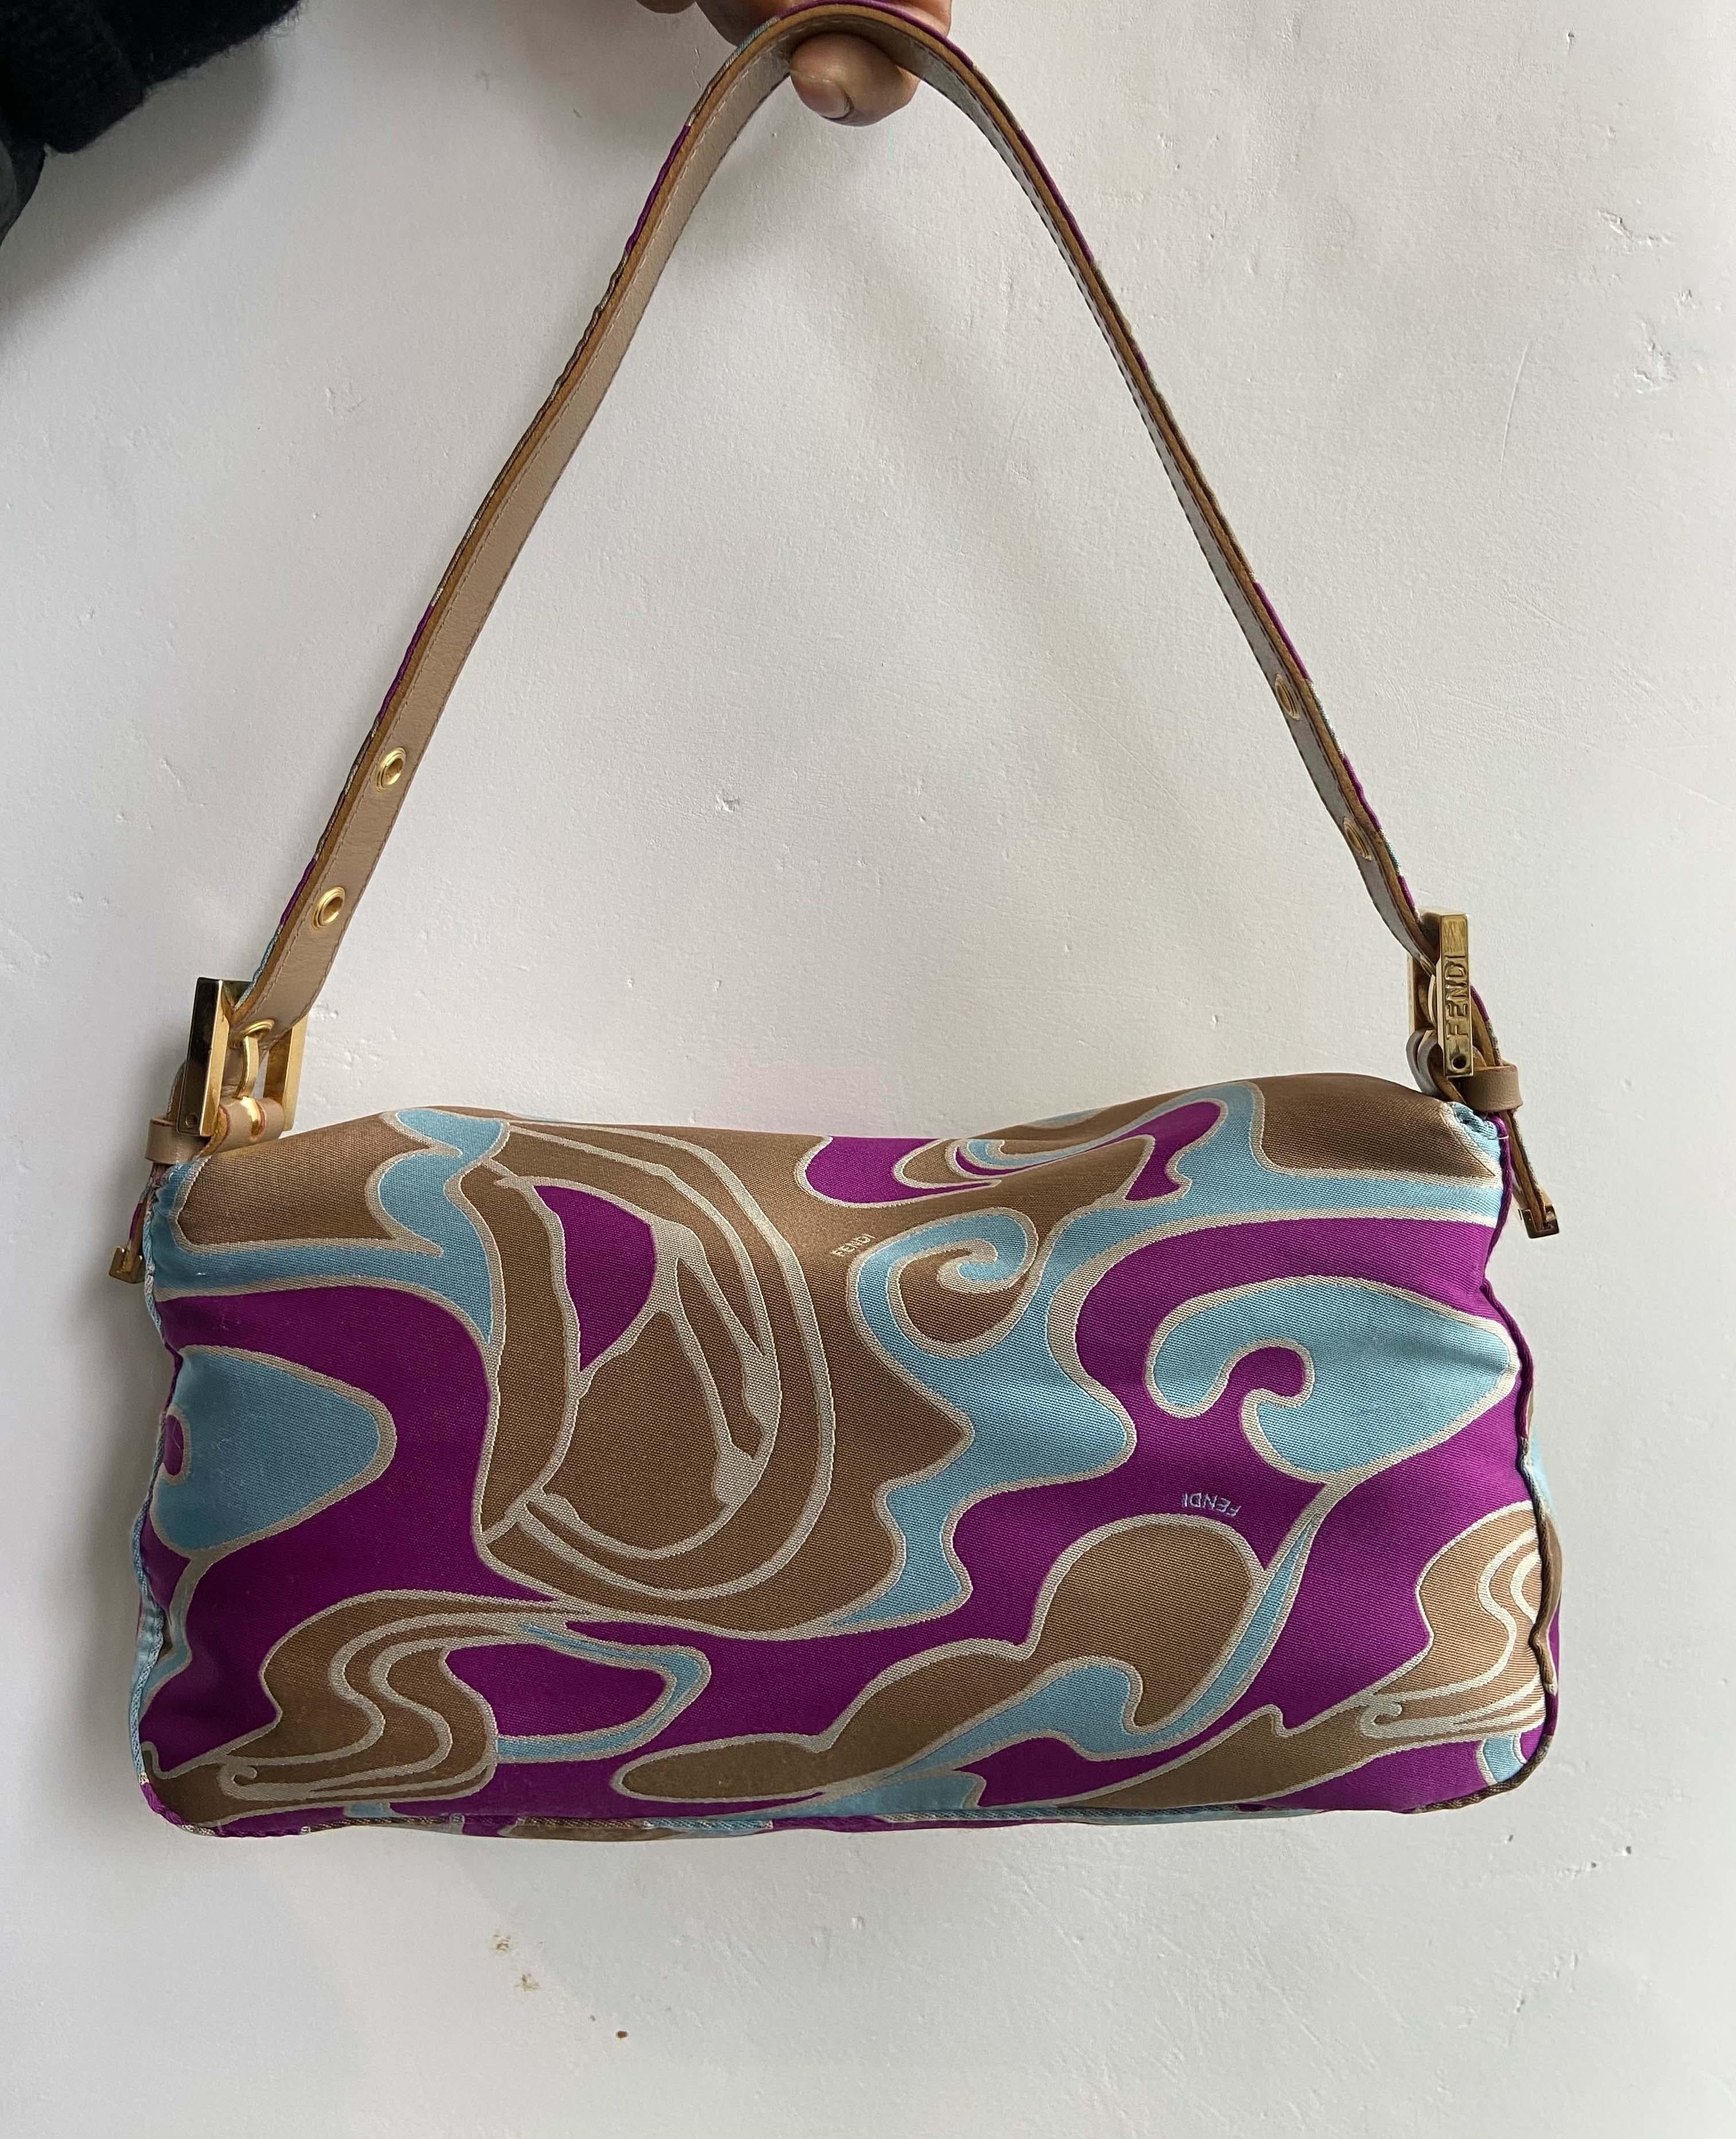 Vintage Fendi late 1990’s shoulder baguette bag. Features the rare psychedelic swirl print in a satin fabric, adjustable leather and satin  strap with Fendi branded hardware buckles, iconic Fendi satin and metal front flap with magnetic closure and